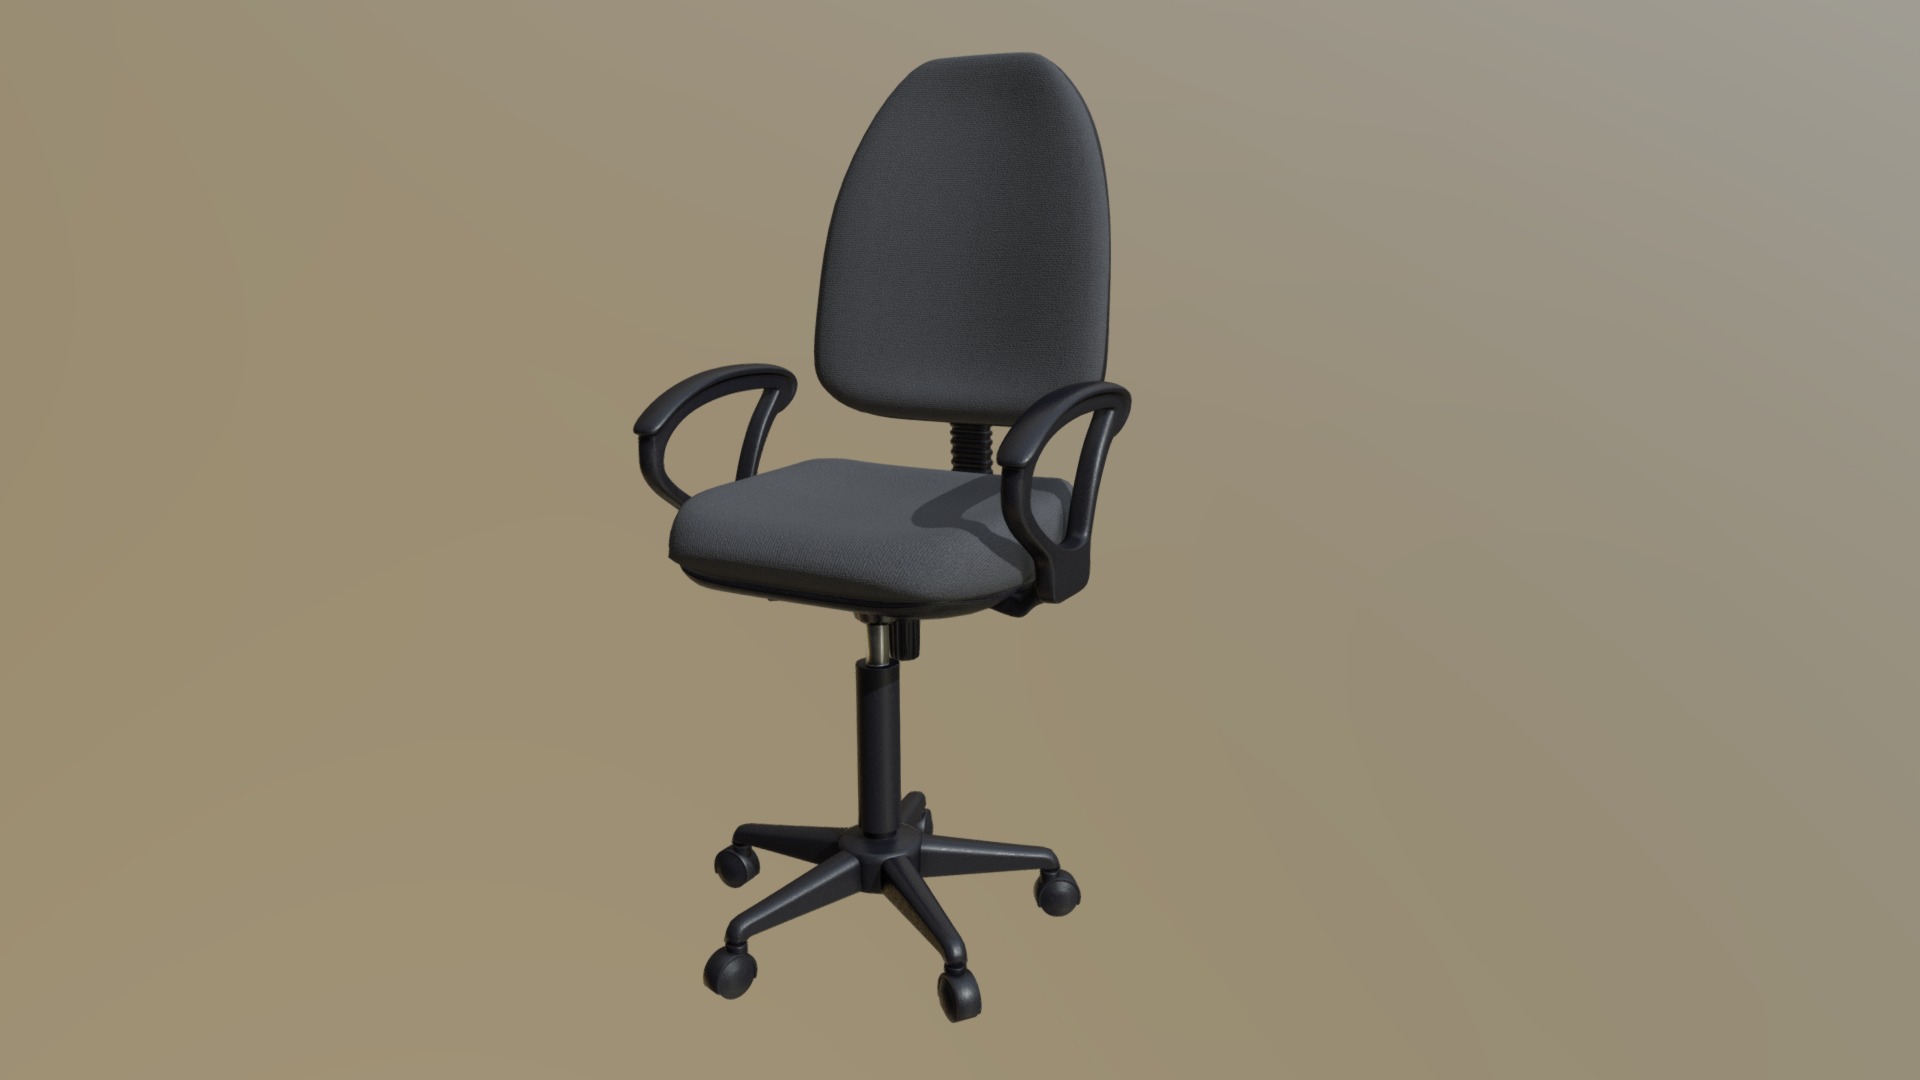 3D model Office Chair - This is a 3D model of the Office Chair. The 3D model is about a black office chair.